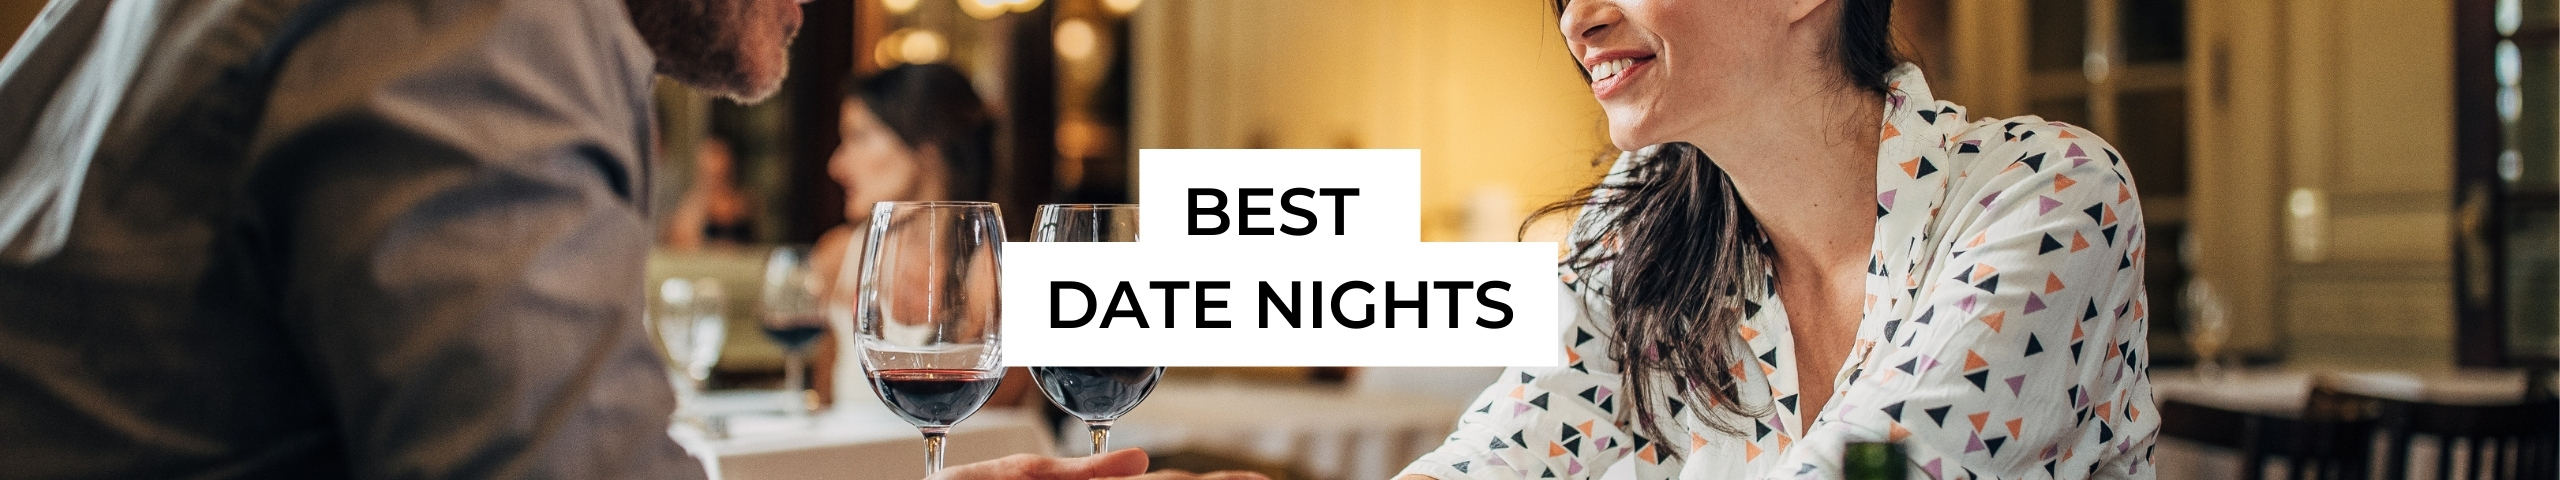 Best Restaurants and Activities for Date Nights in Chattanooga, Tennessee